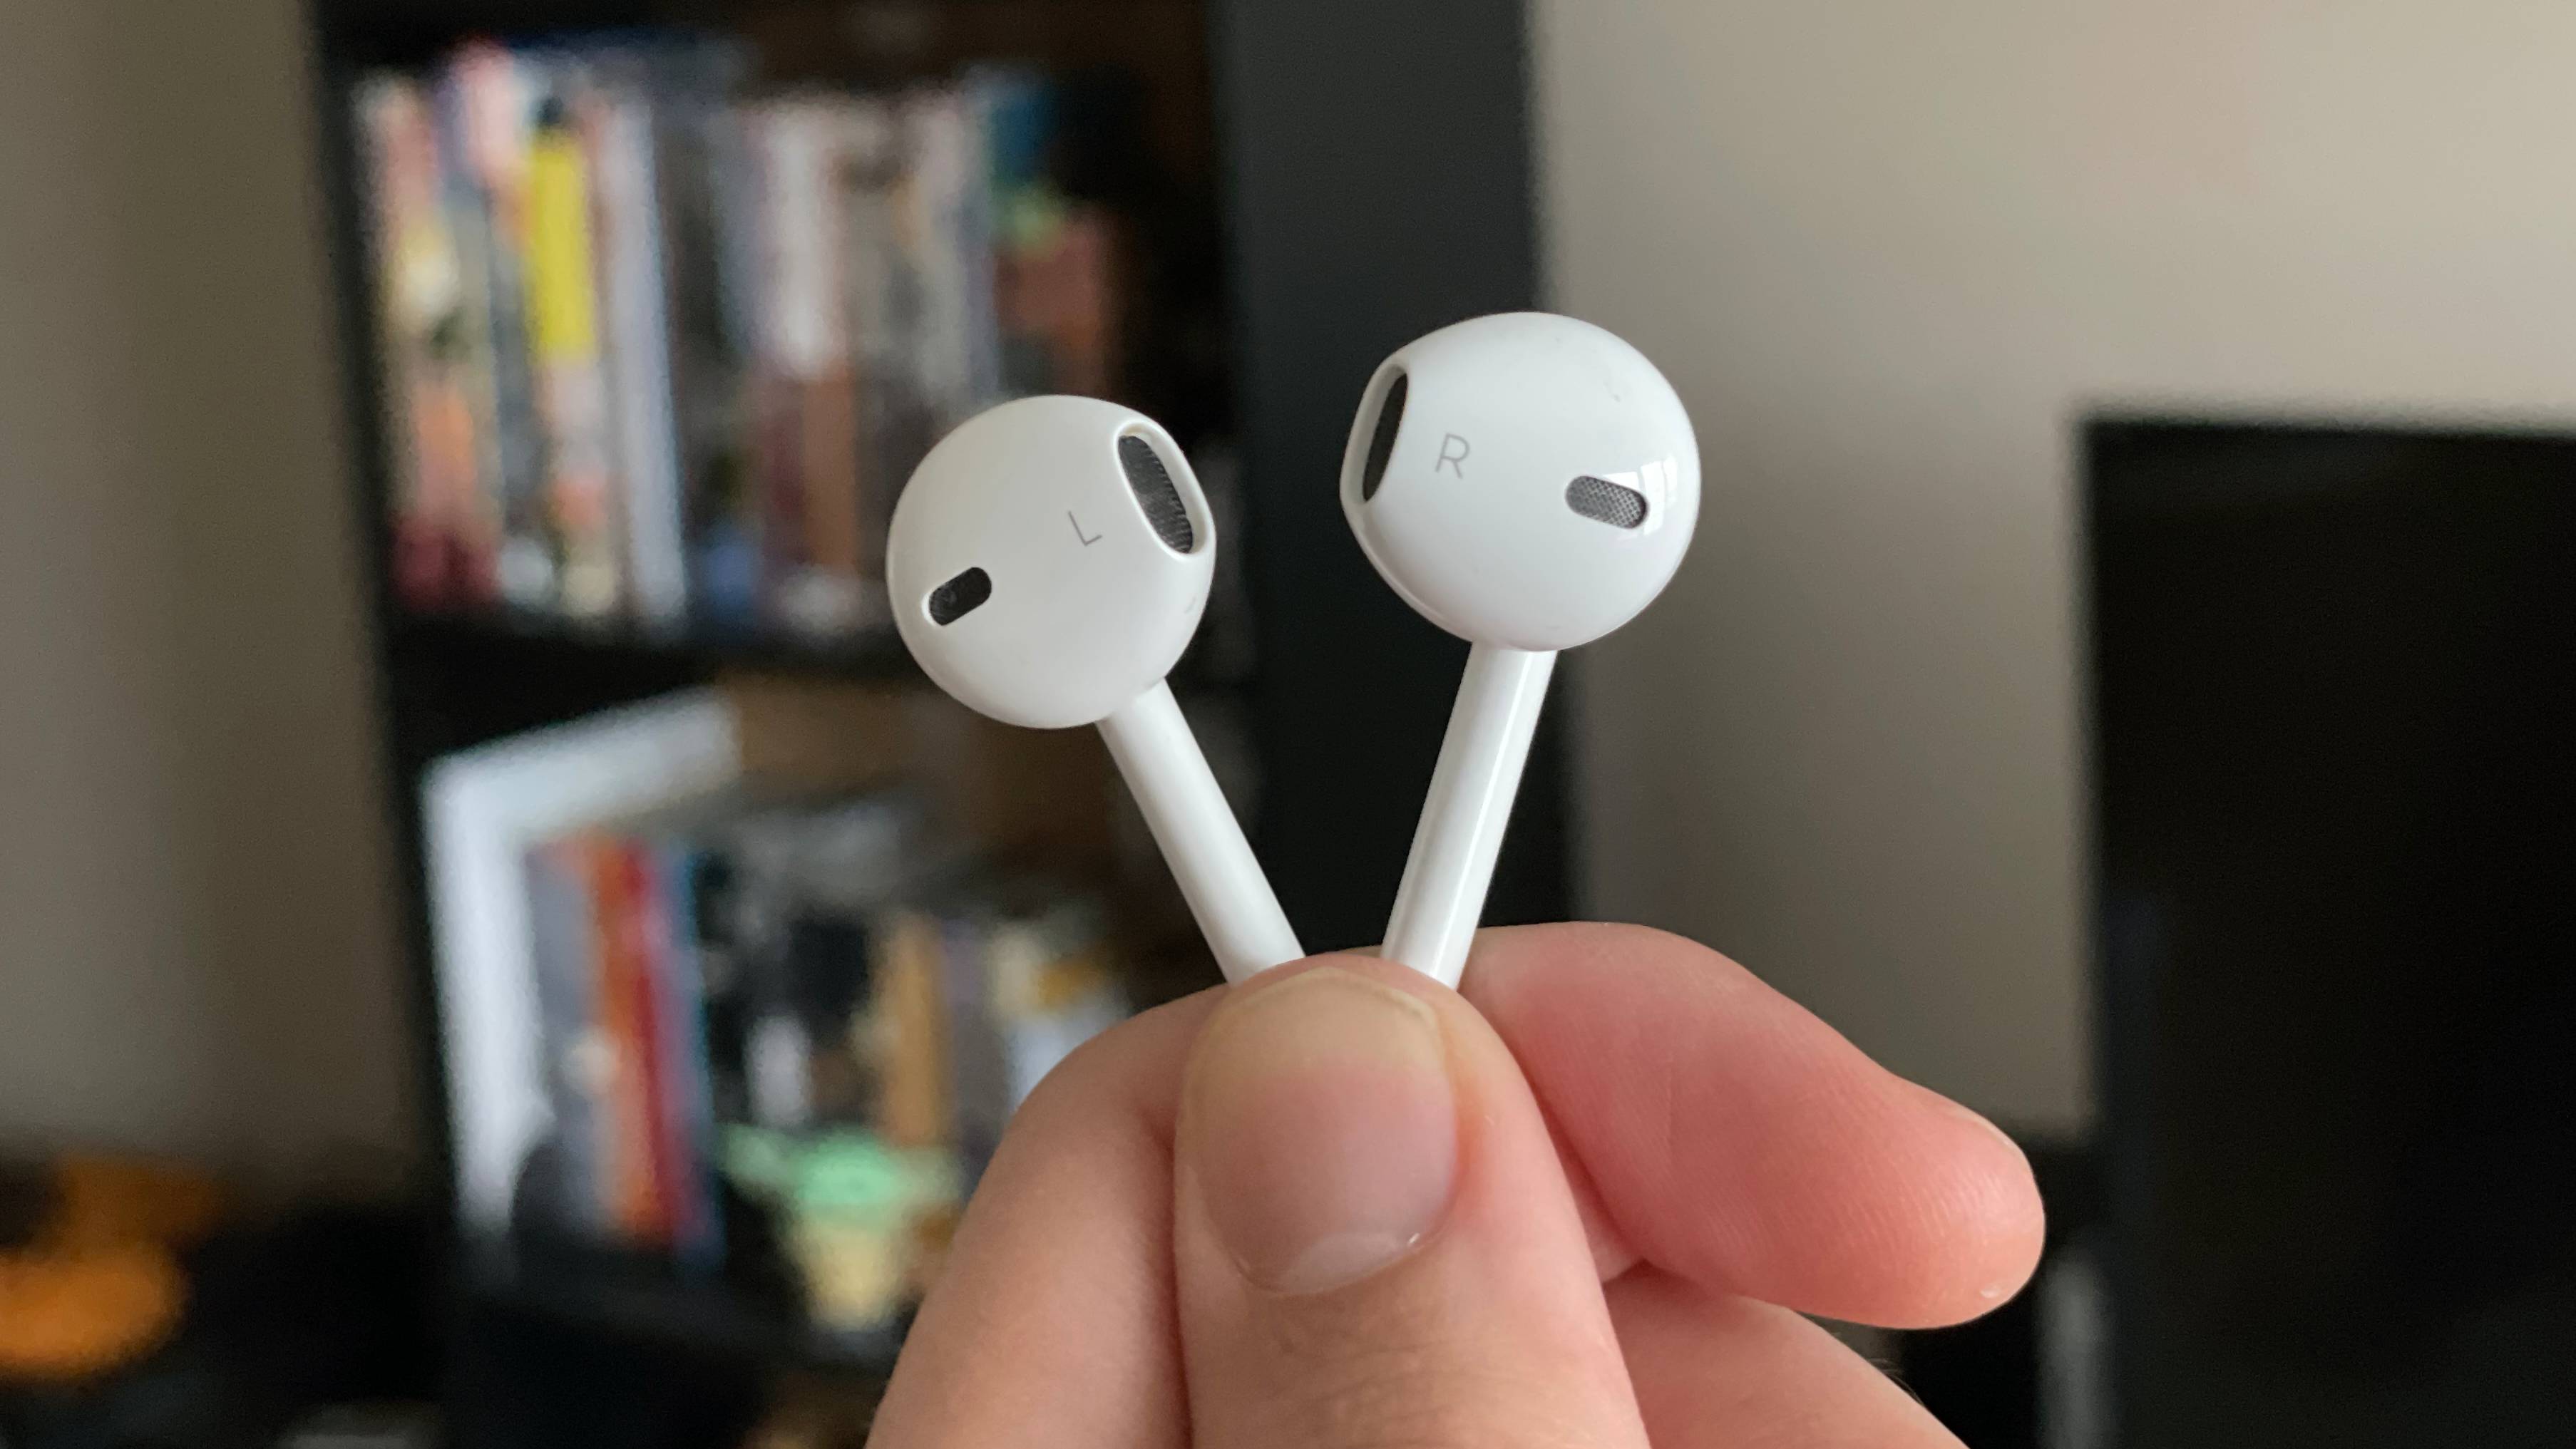 Apple's new $19 EarPods are a smarter purchase than the $549